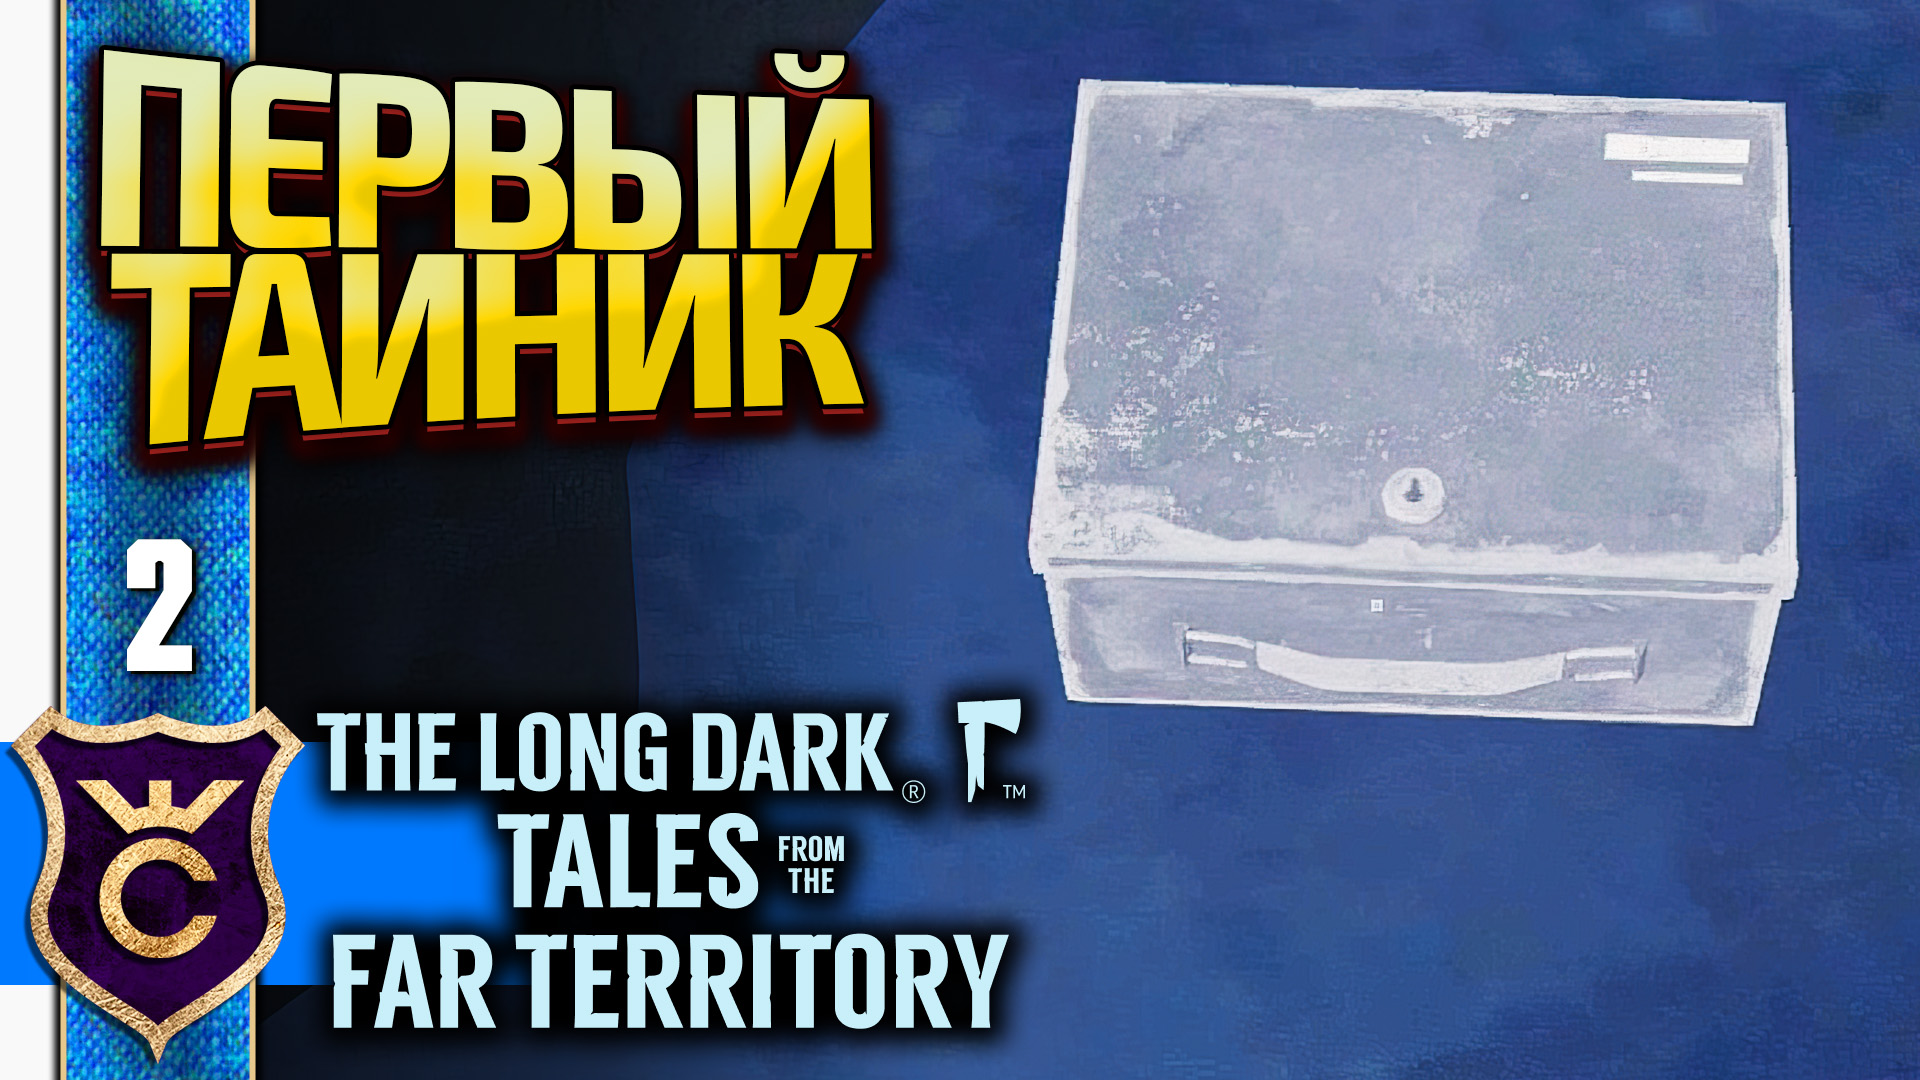 The long Dark Tales from the far Territory карта. The long Dark Tales from the far Territory Map. The long Dark 09:58. The long Dark v 03 New. Tales from the far territory